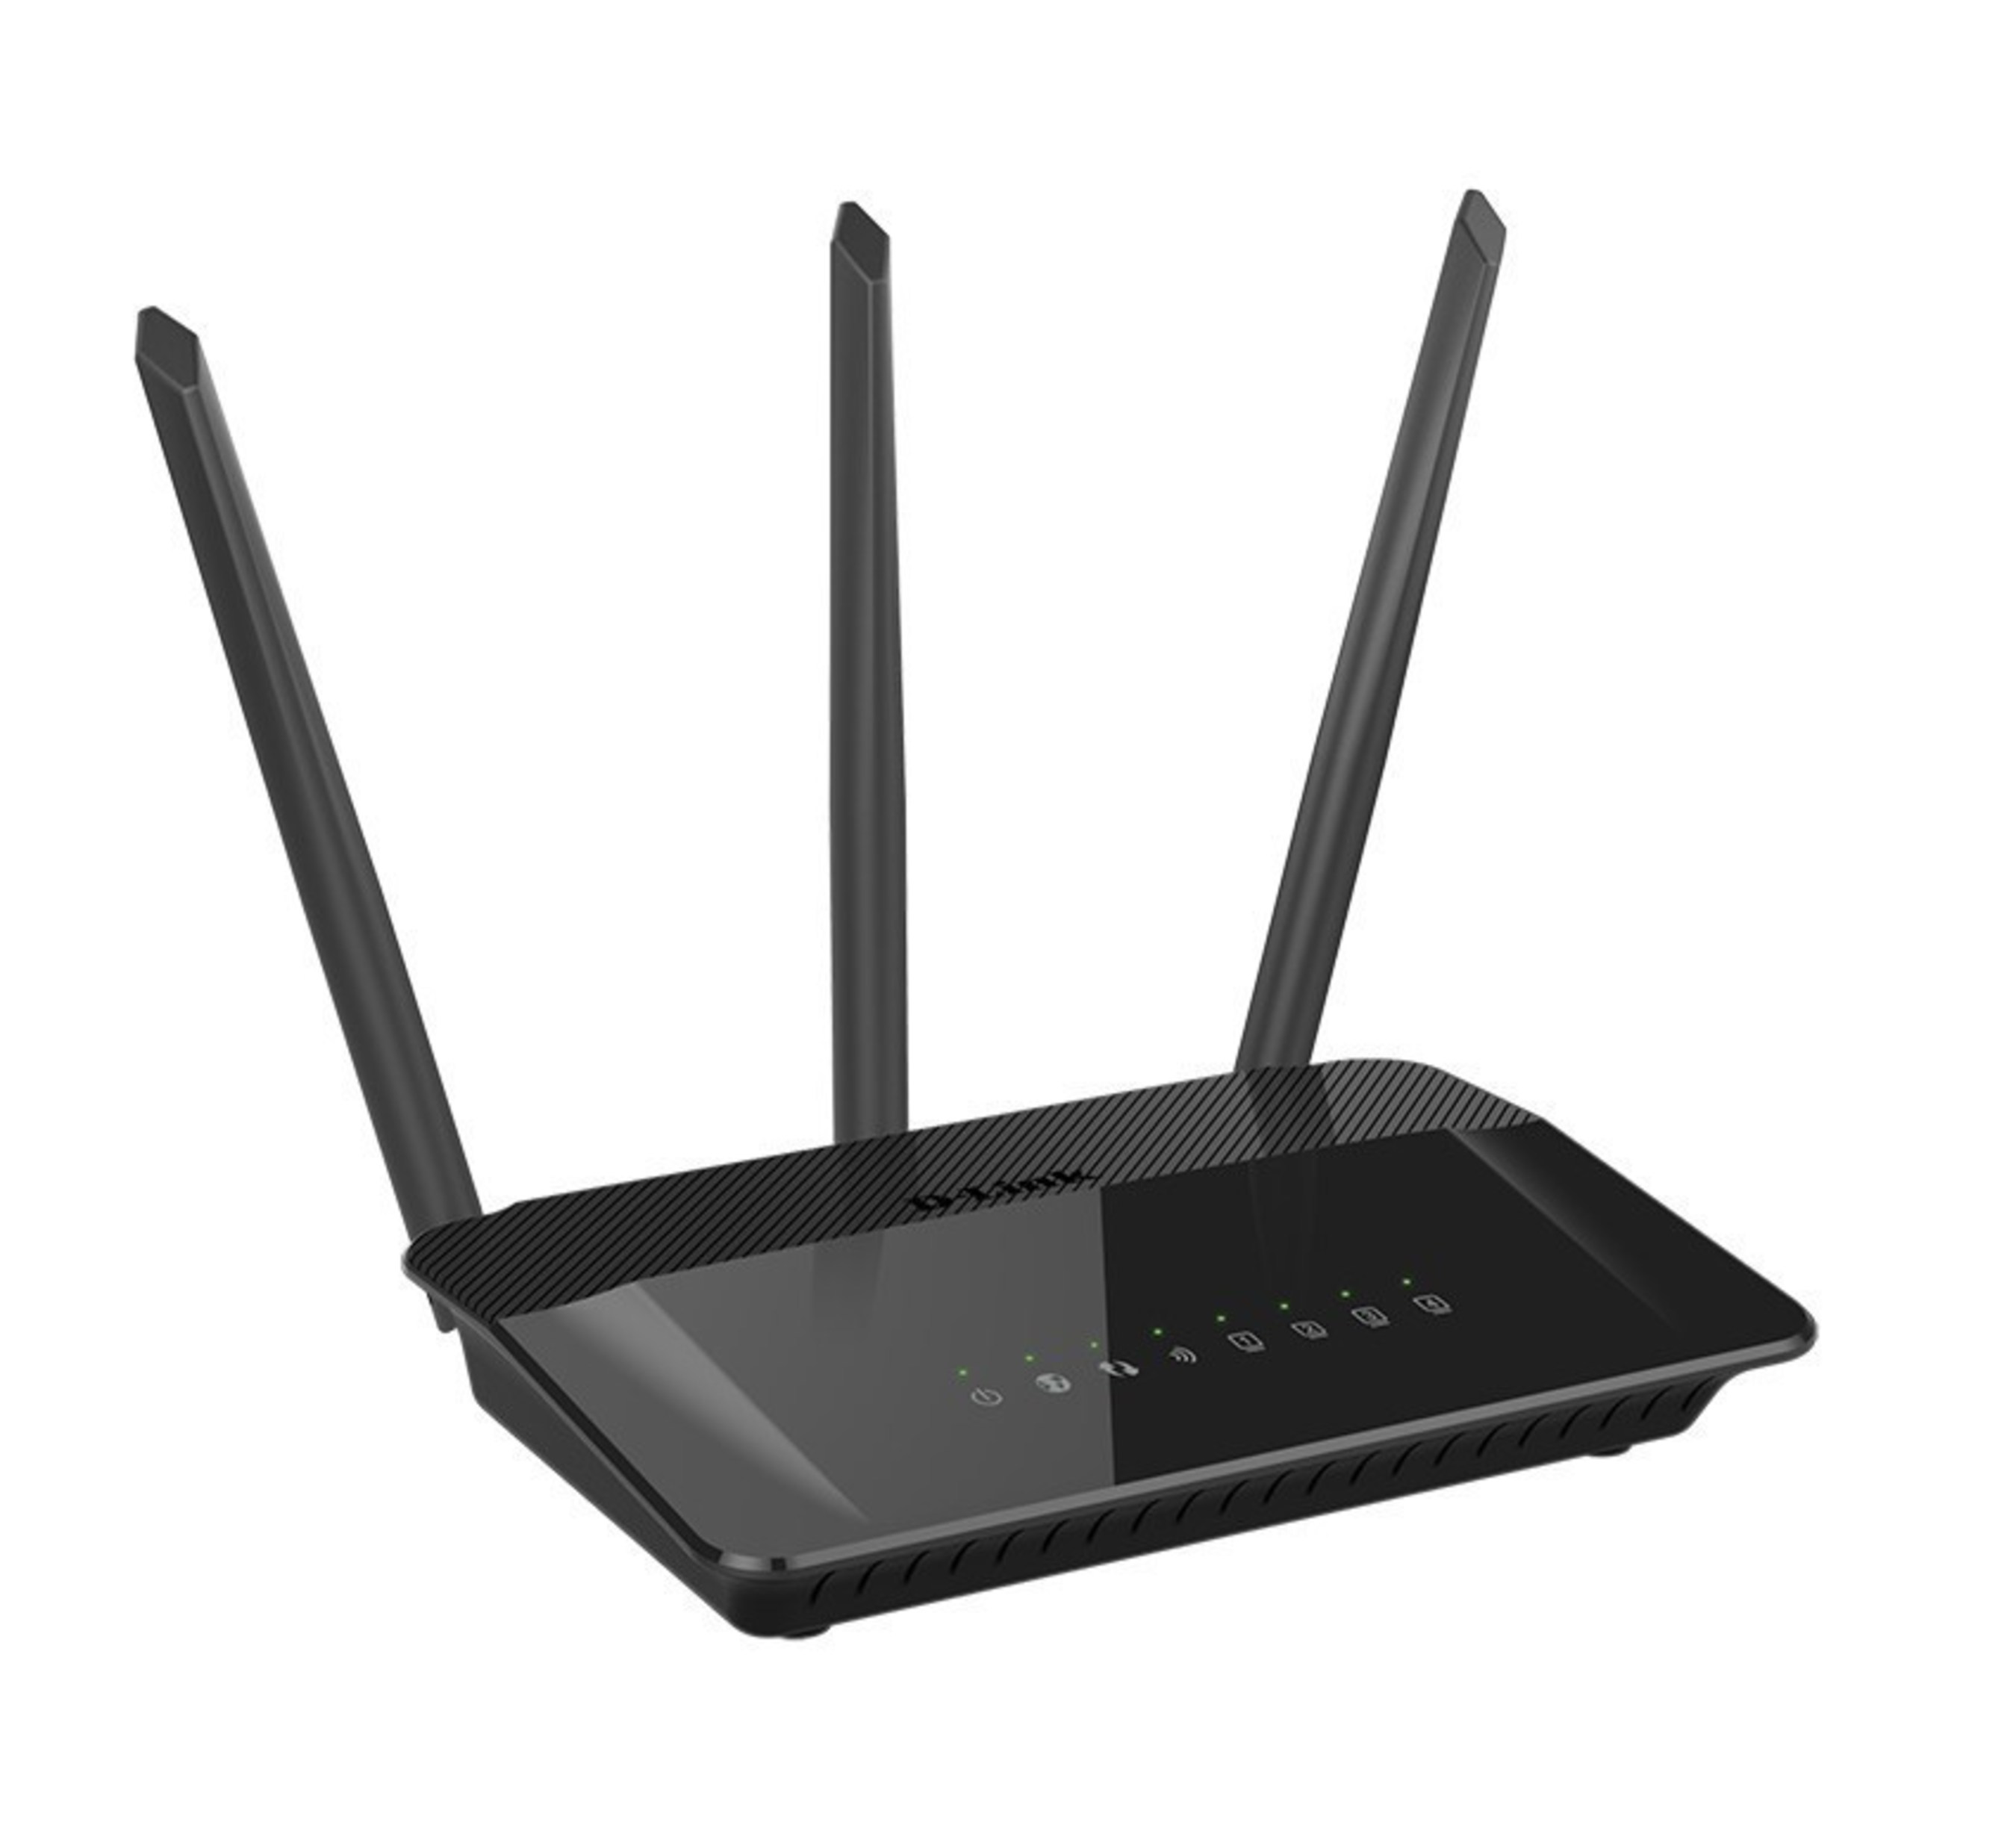 The D-Link AC1750 Wi-Fi Router (DIR-895) boasts high-power amplifiers that deliver better Wi-Fi coverage for all connected Wi-Fi devices.